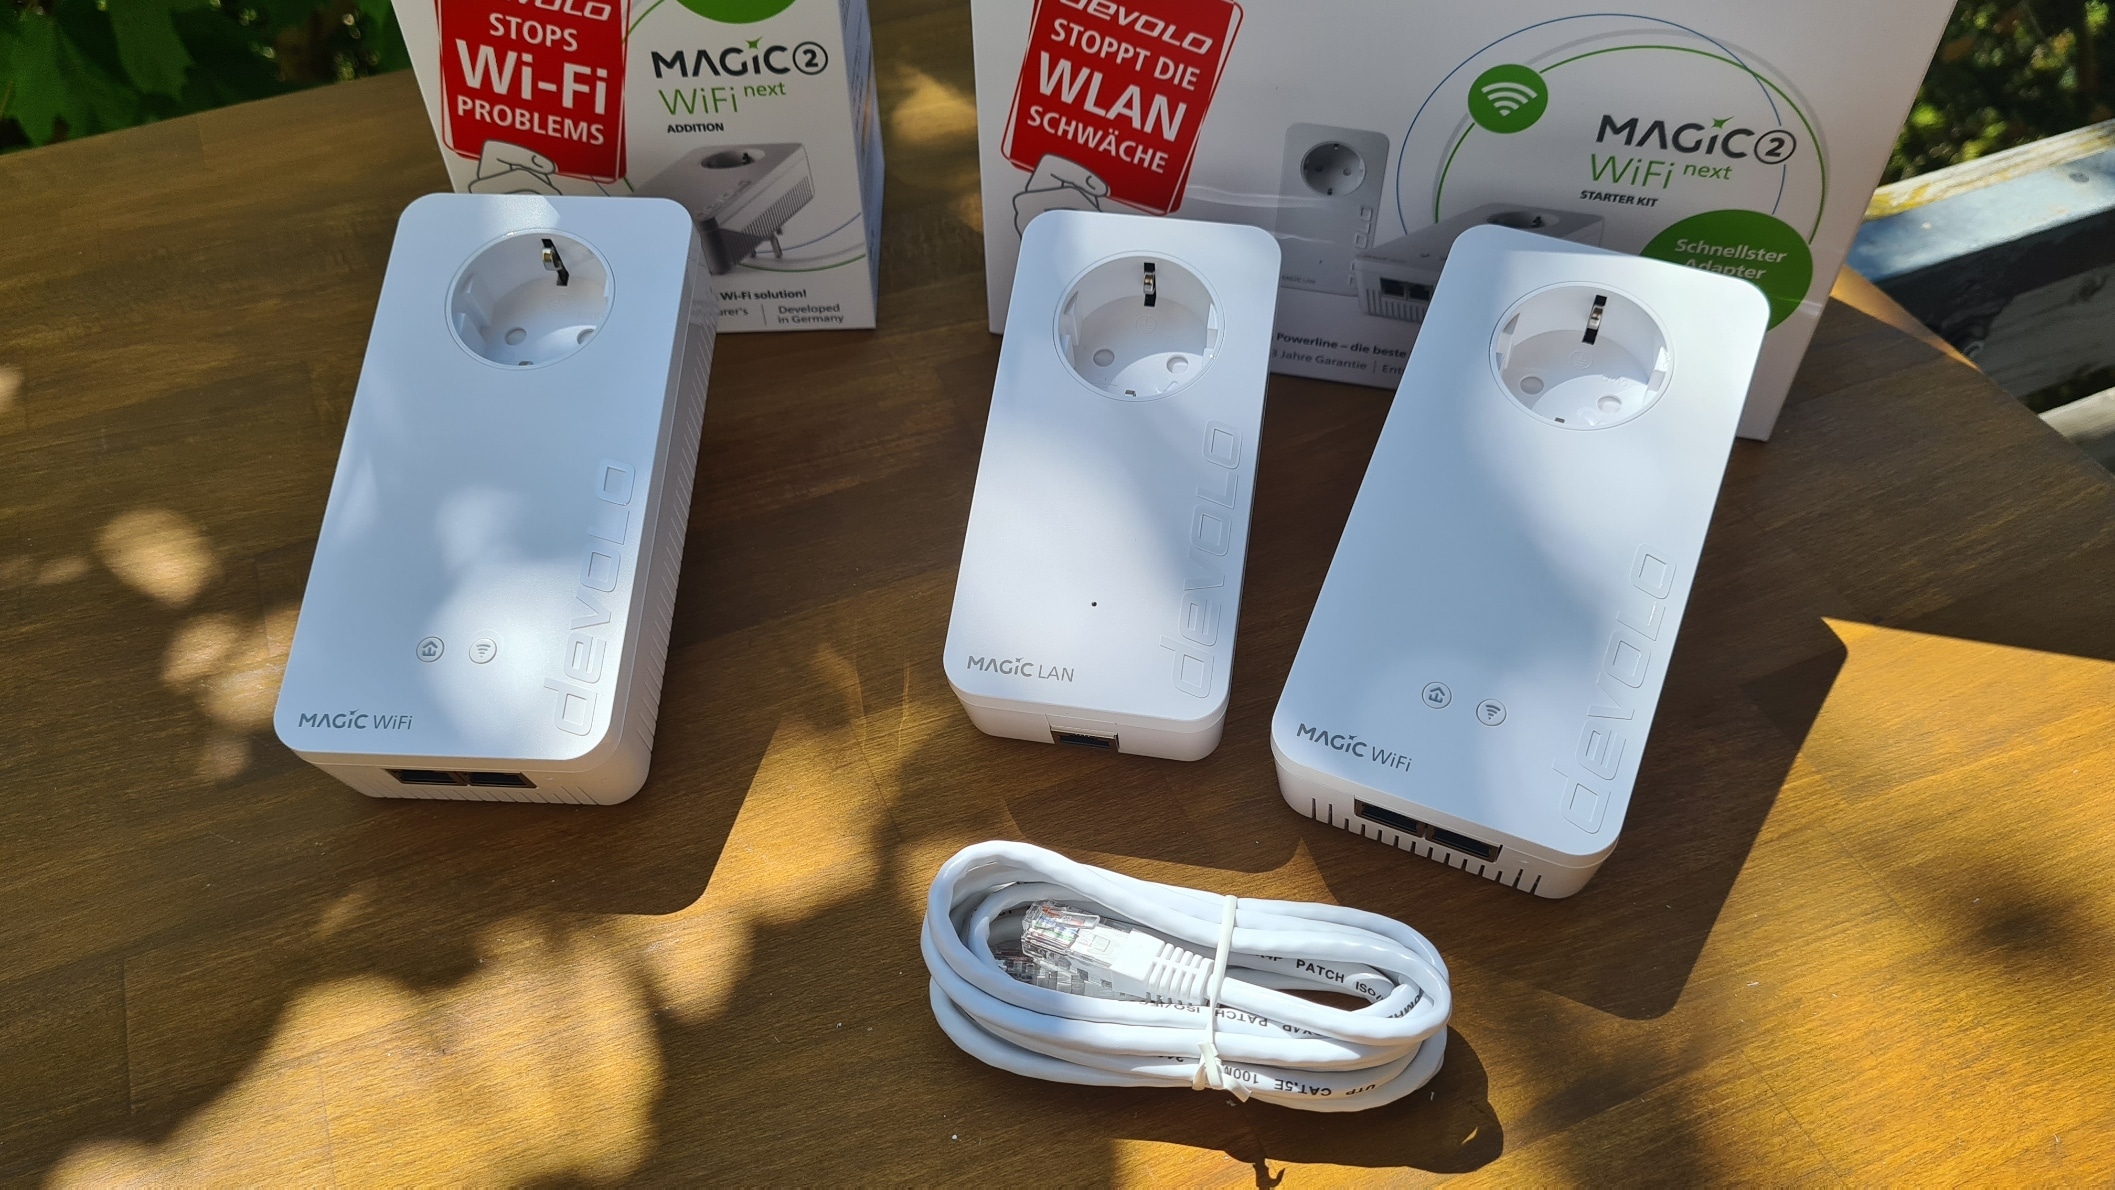 Tot opslaan Suri devolo Magic 2 WiFi next in test - WLAN improvement for large apartments?